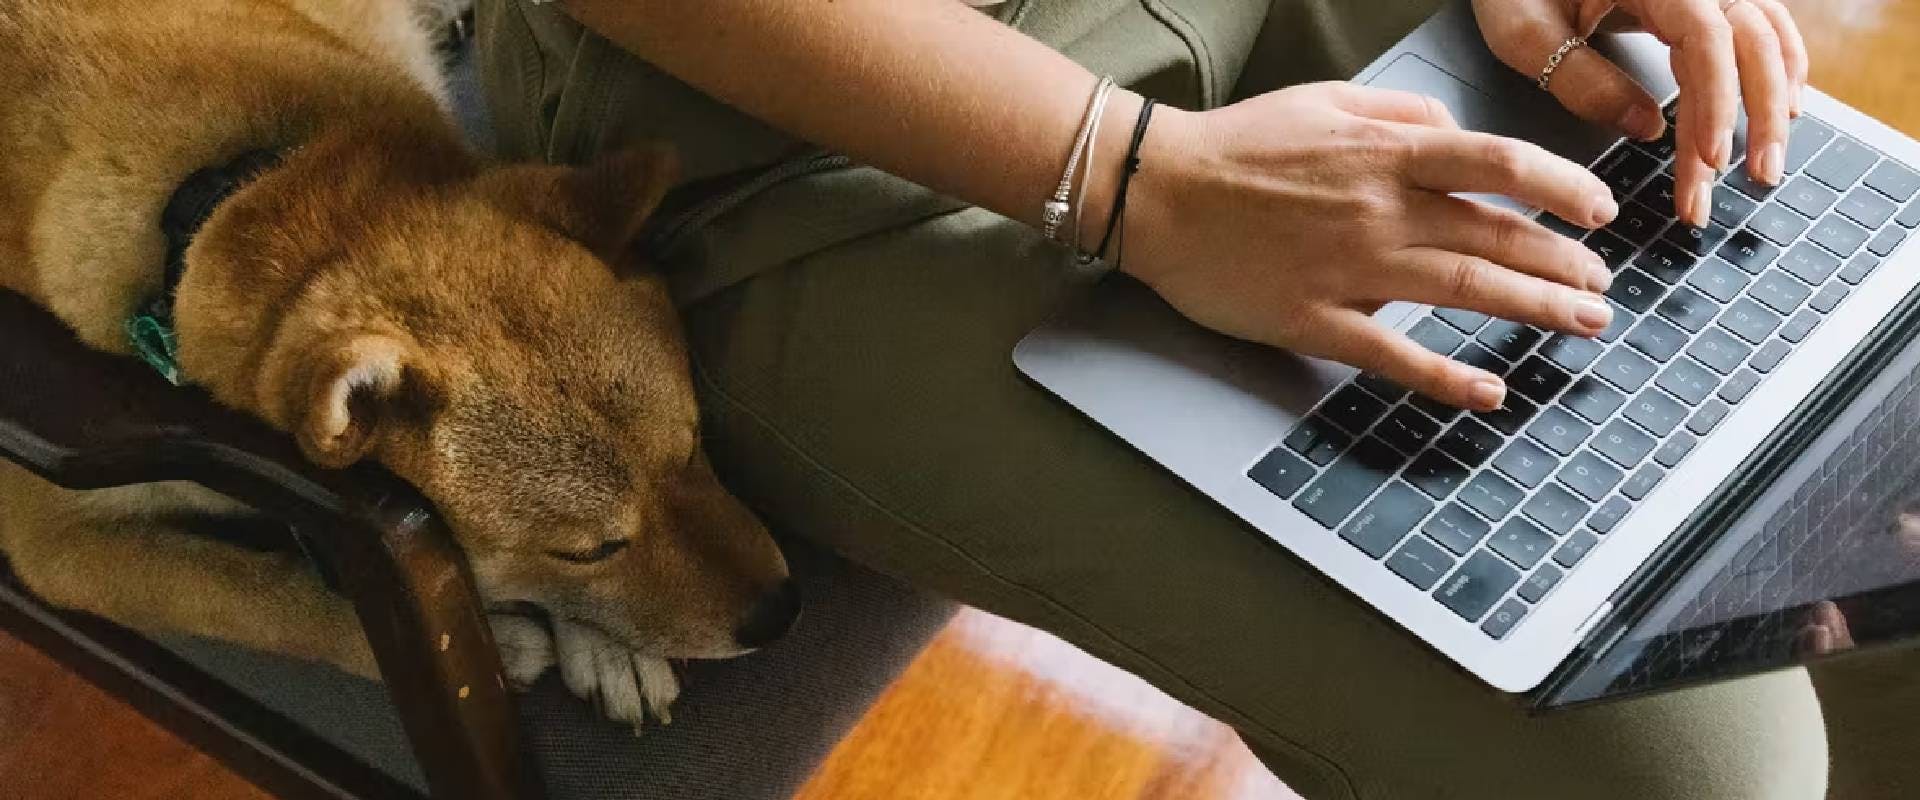 Person using a laptop and a dog sitting on the chair next to them